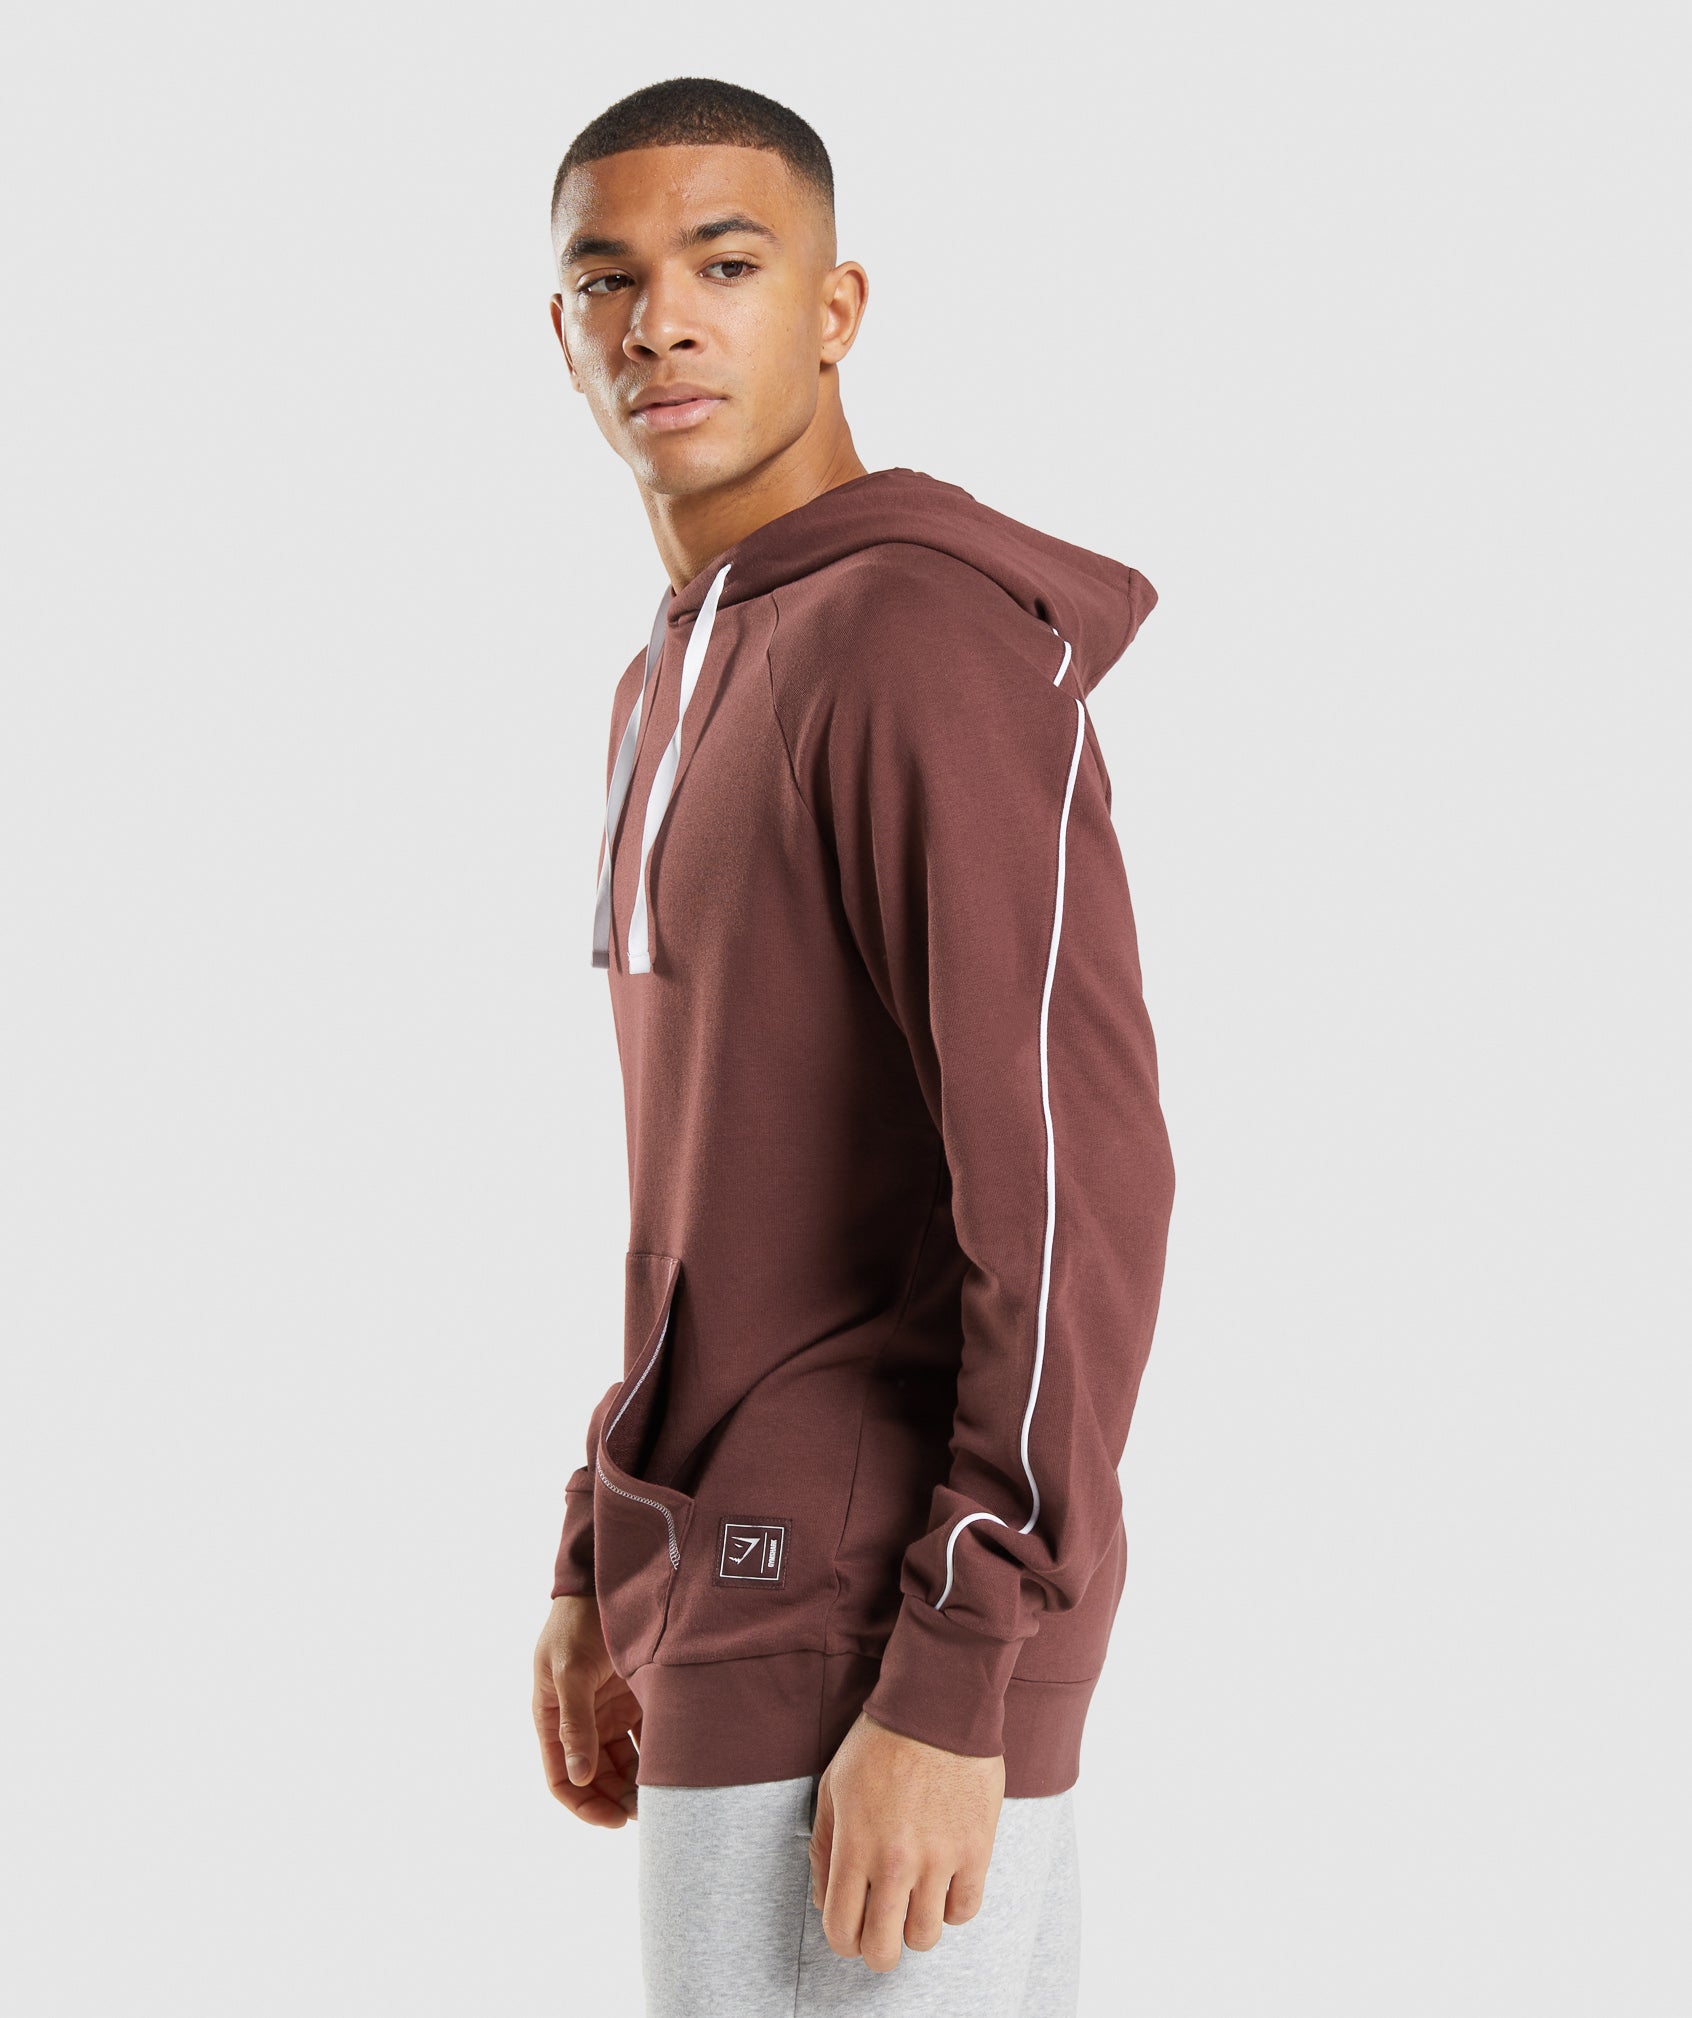 Recess Hoodie in Cherry Brown/White